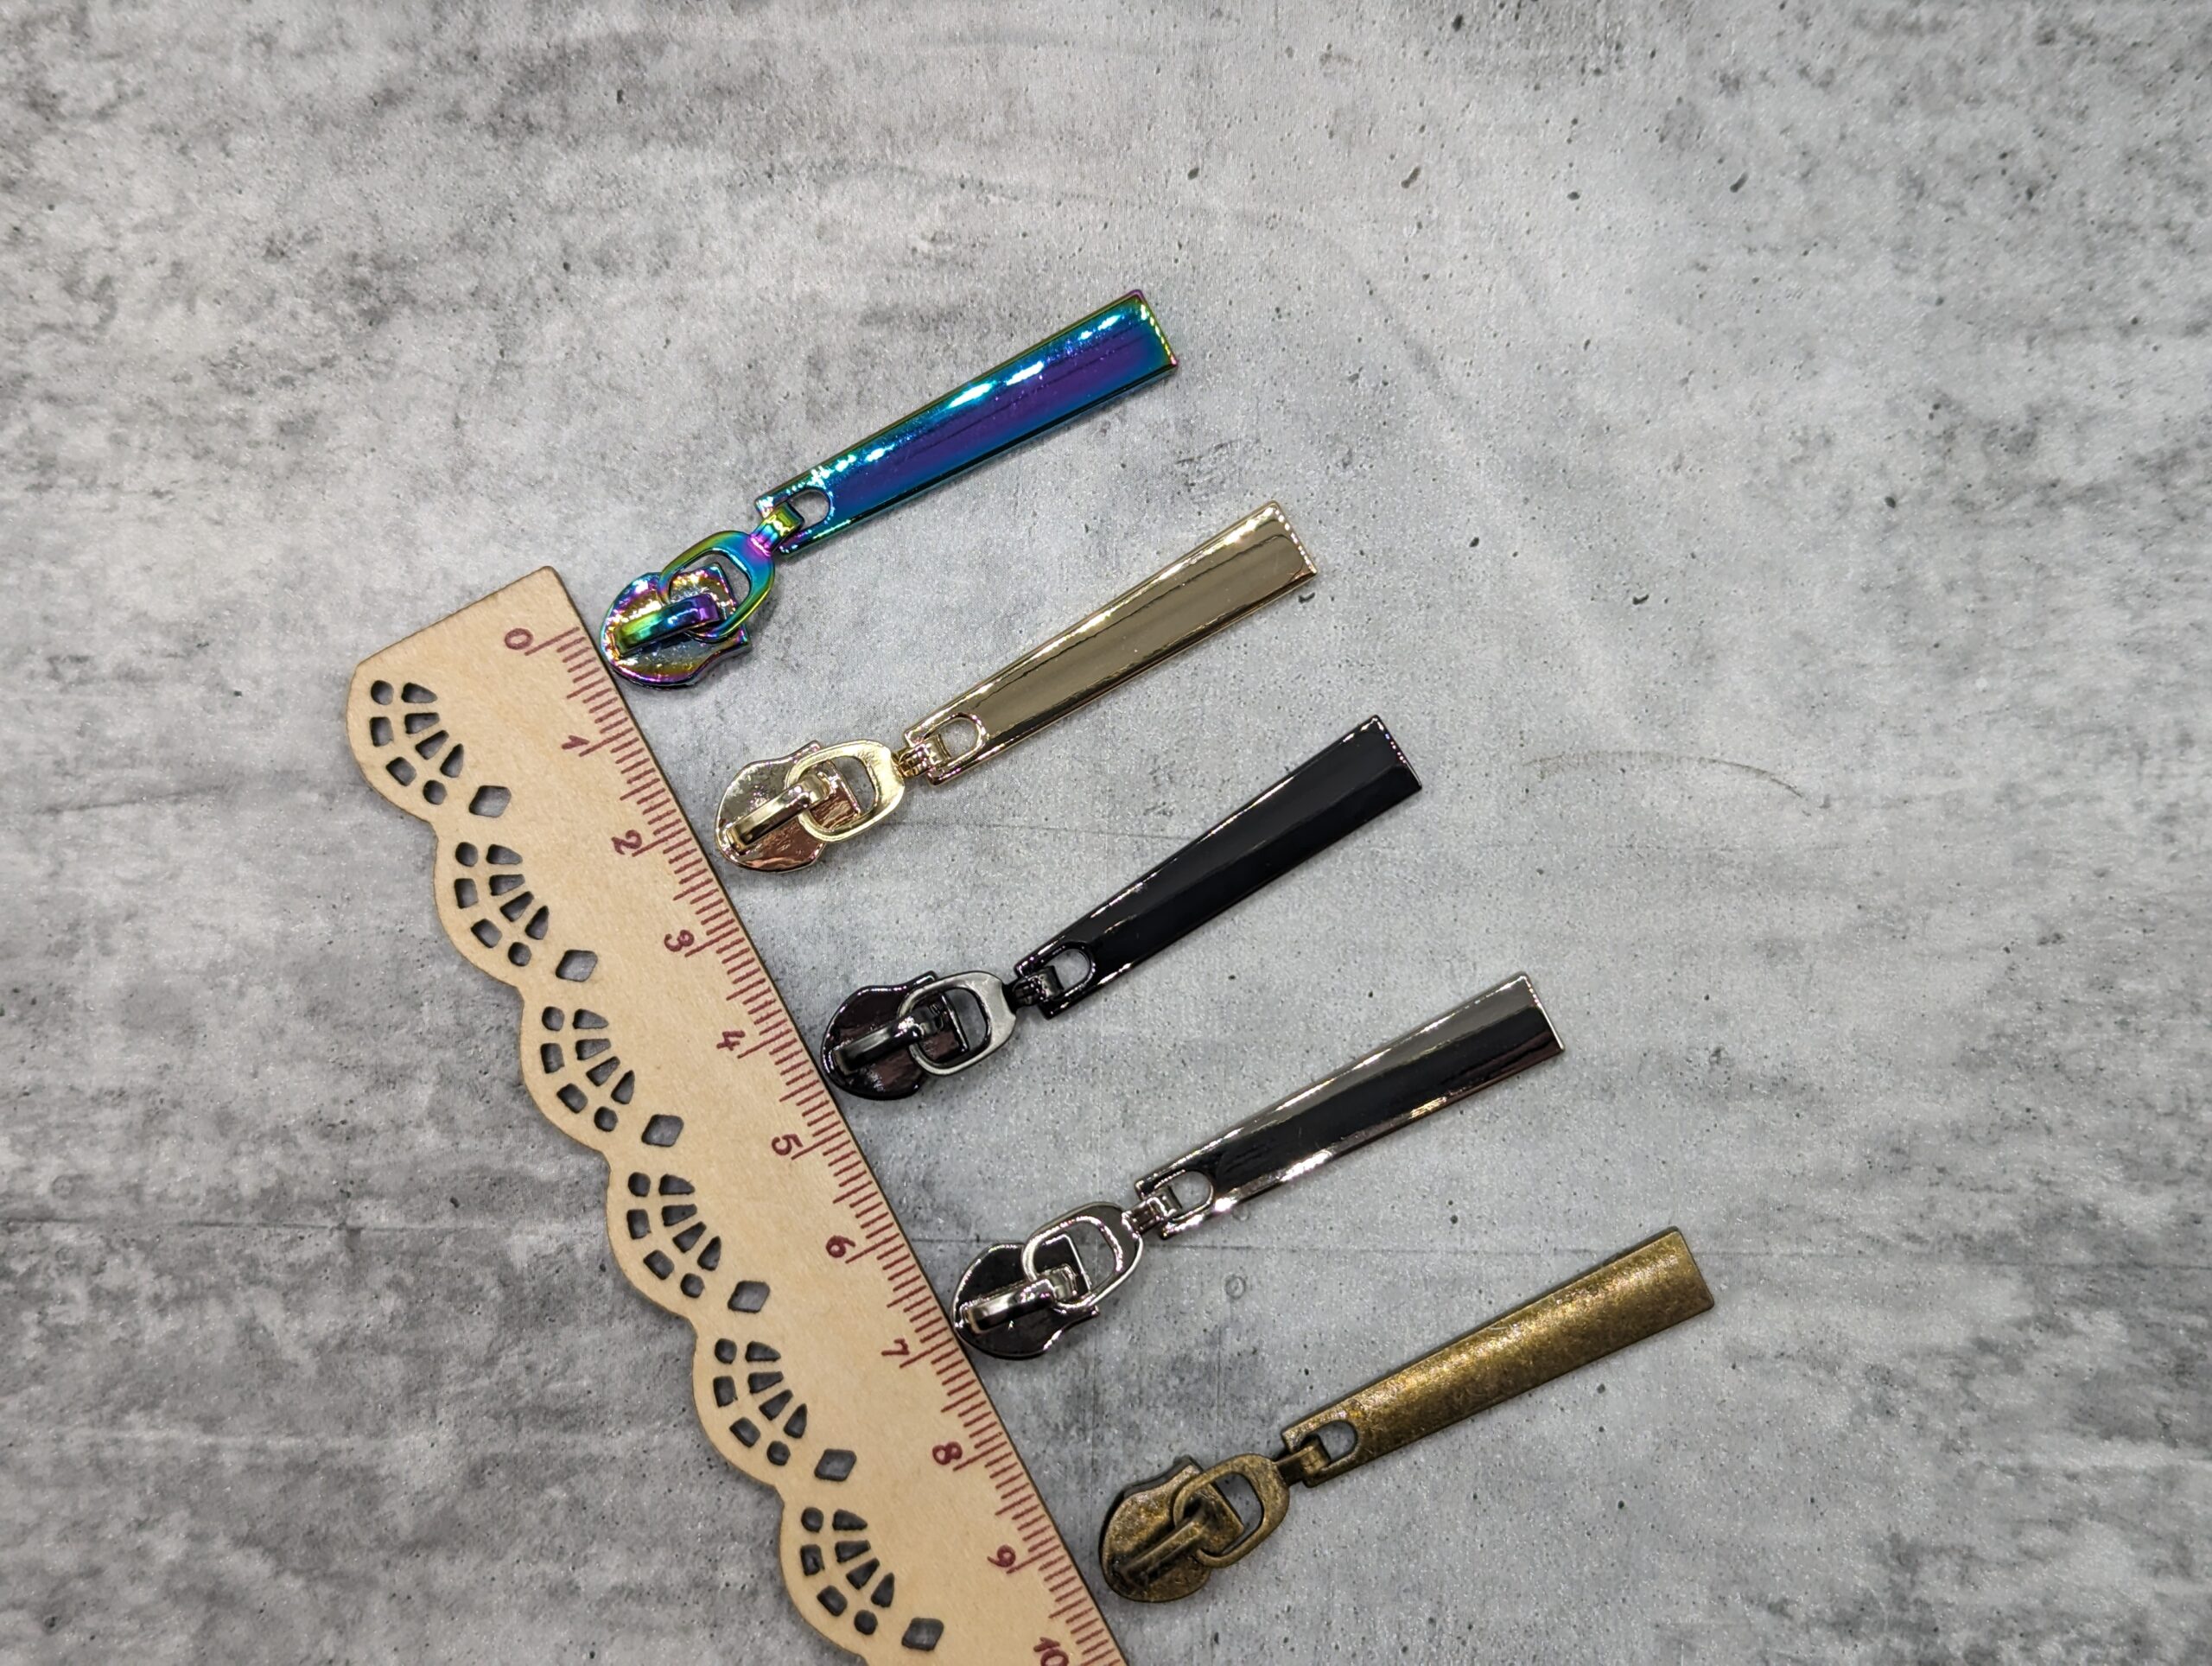 #5 Sleek Pulls - All with Ruler - Electric Needle Girls